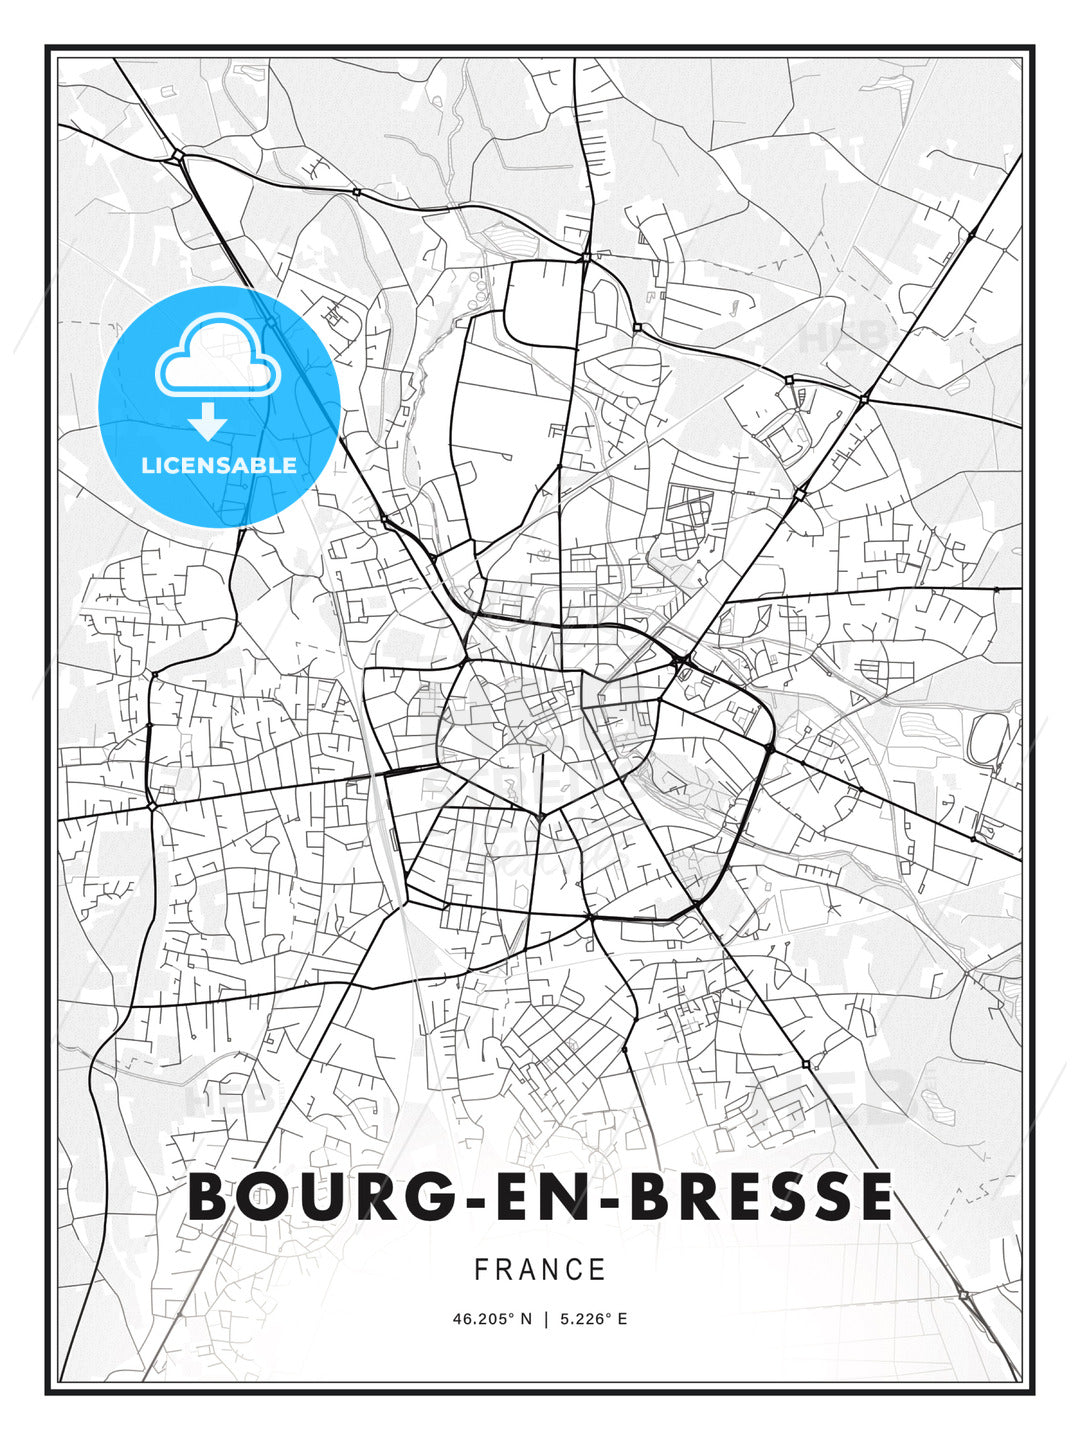 Bourg-en-Bresse, France, Modern Print Template in Various Formats - HEBSTREITS Sketches